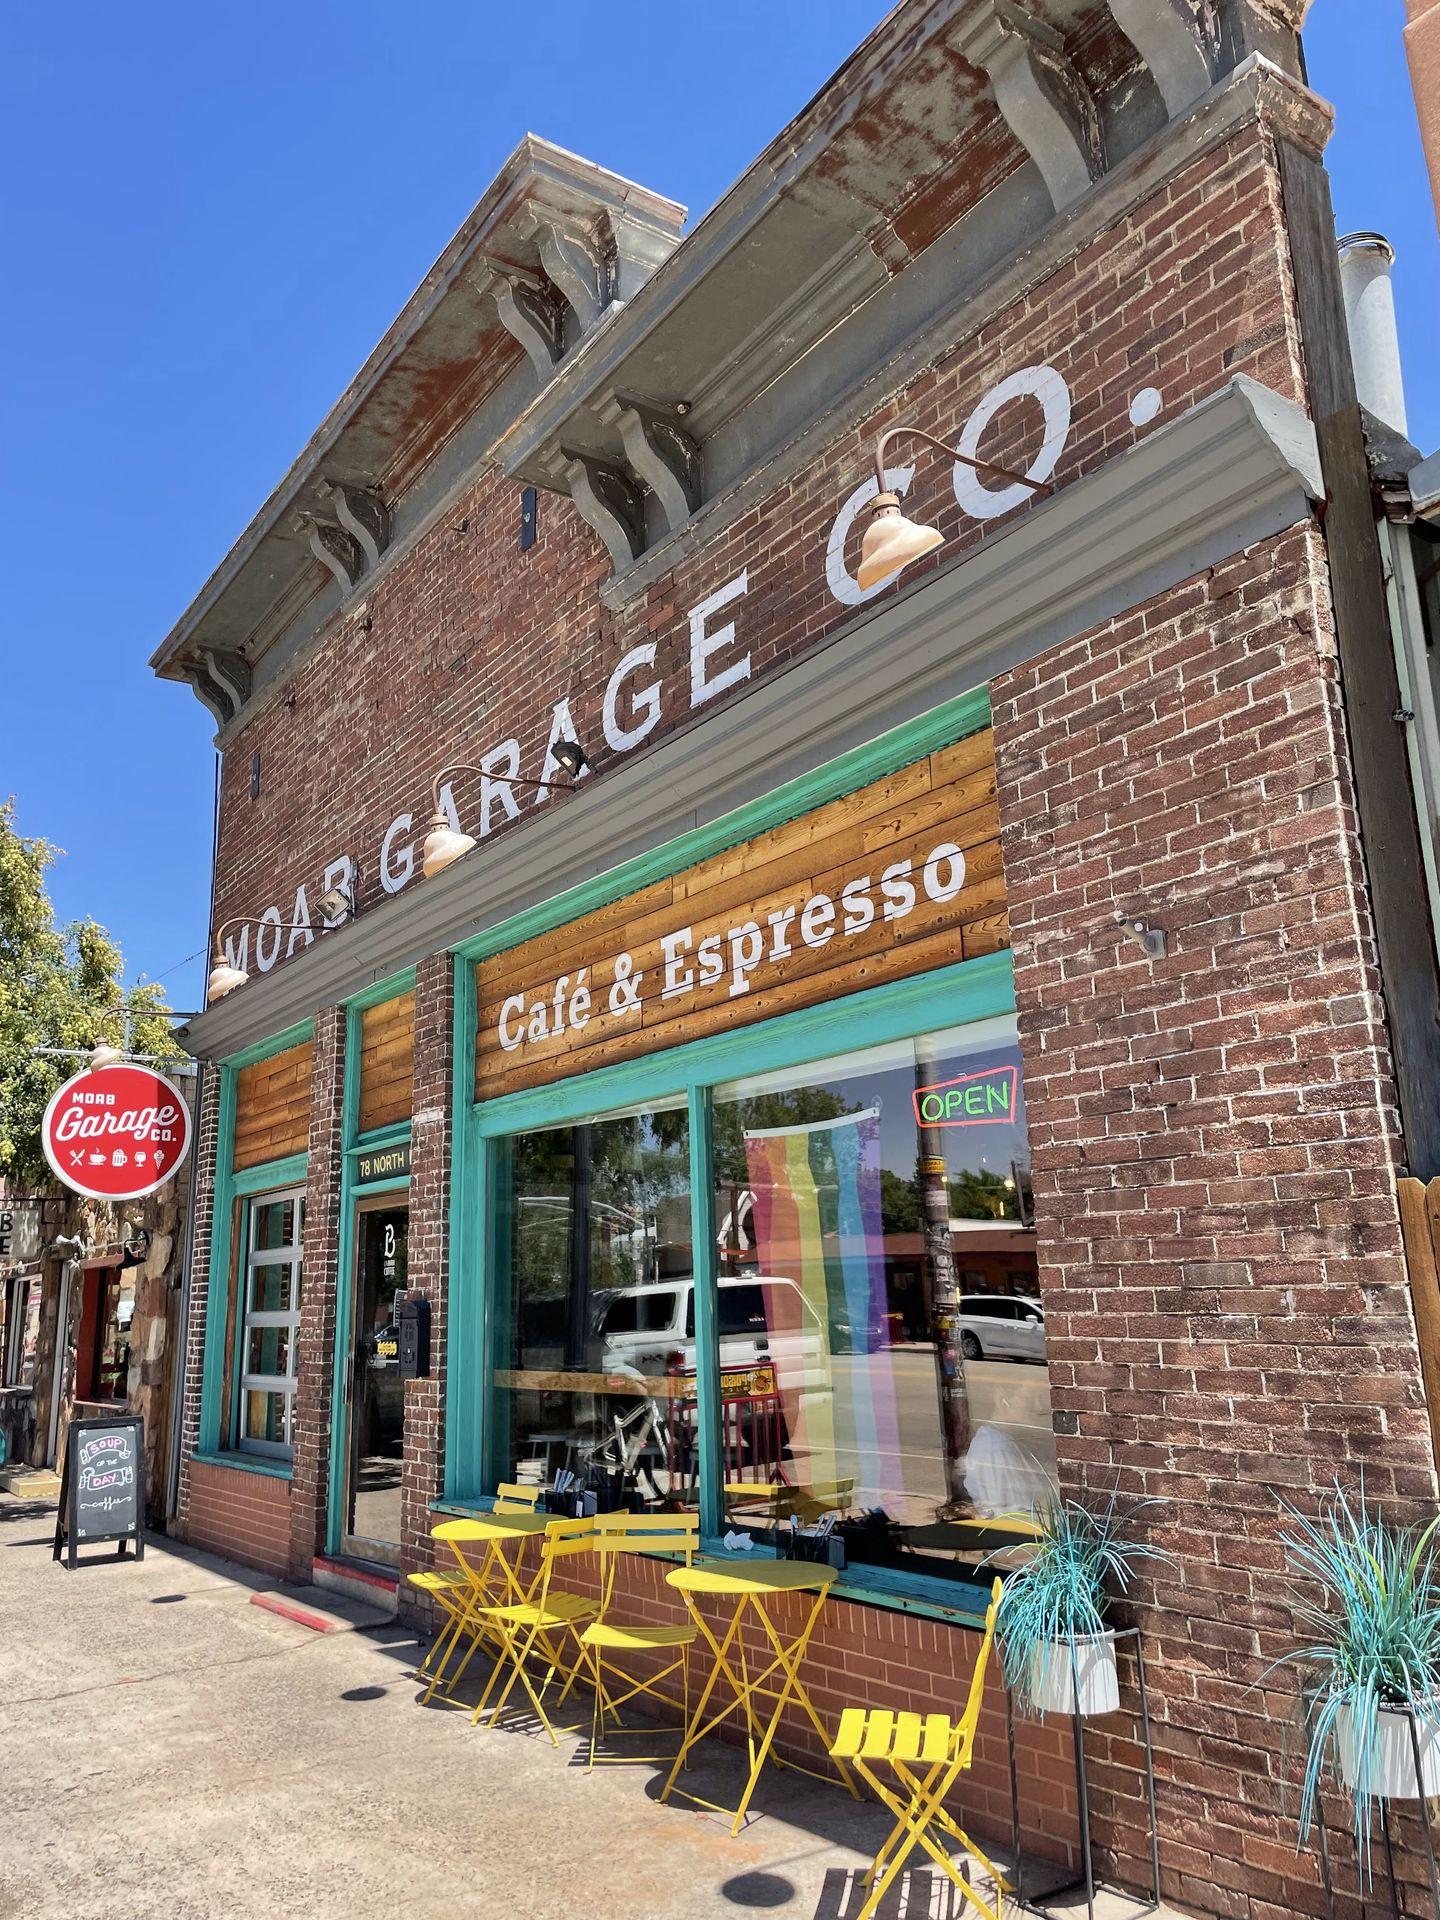 The exterior of Moab Garage Co. Above the window reads "Cafe & Espresso"